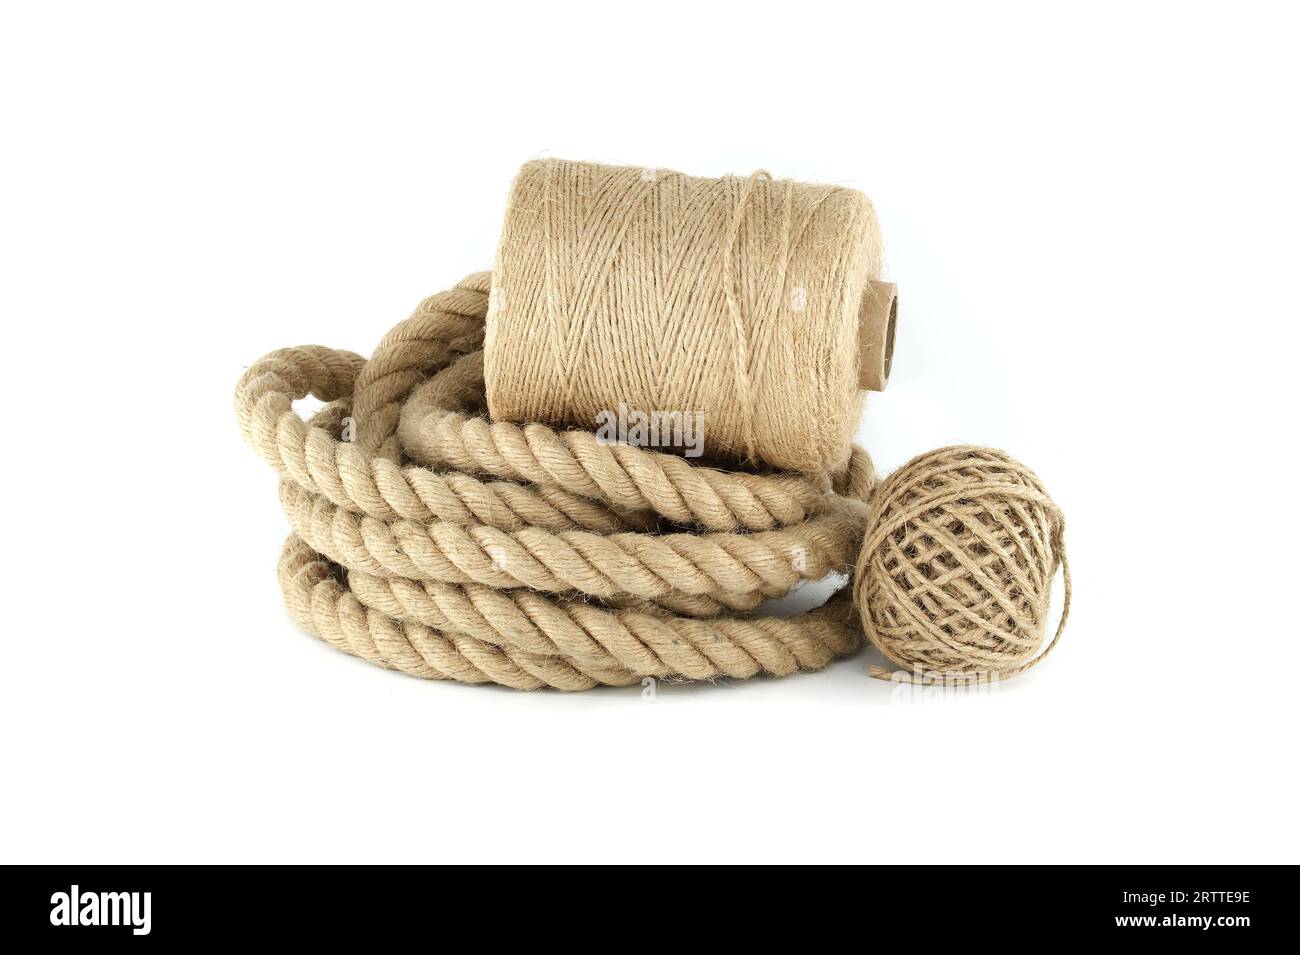 Thick Strong Jute Rope and Twine Spool on White Stock Image